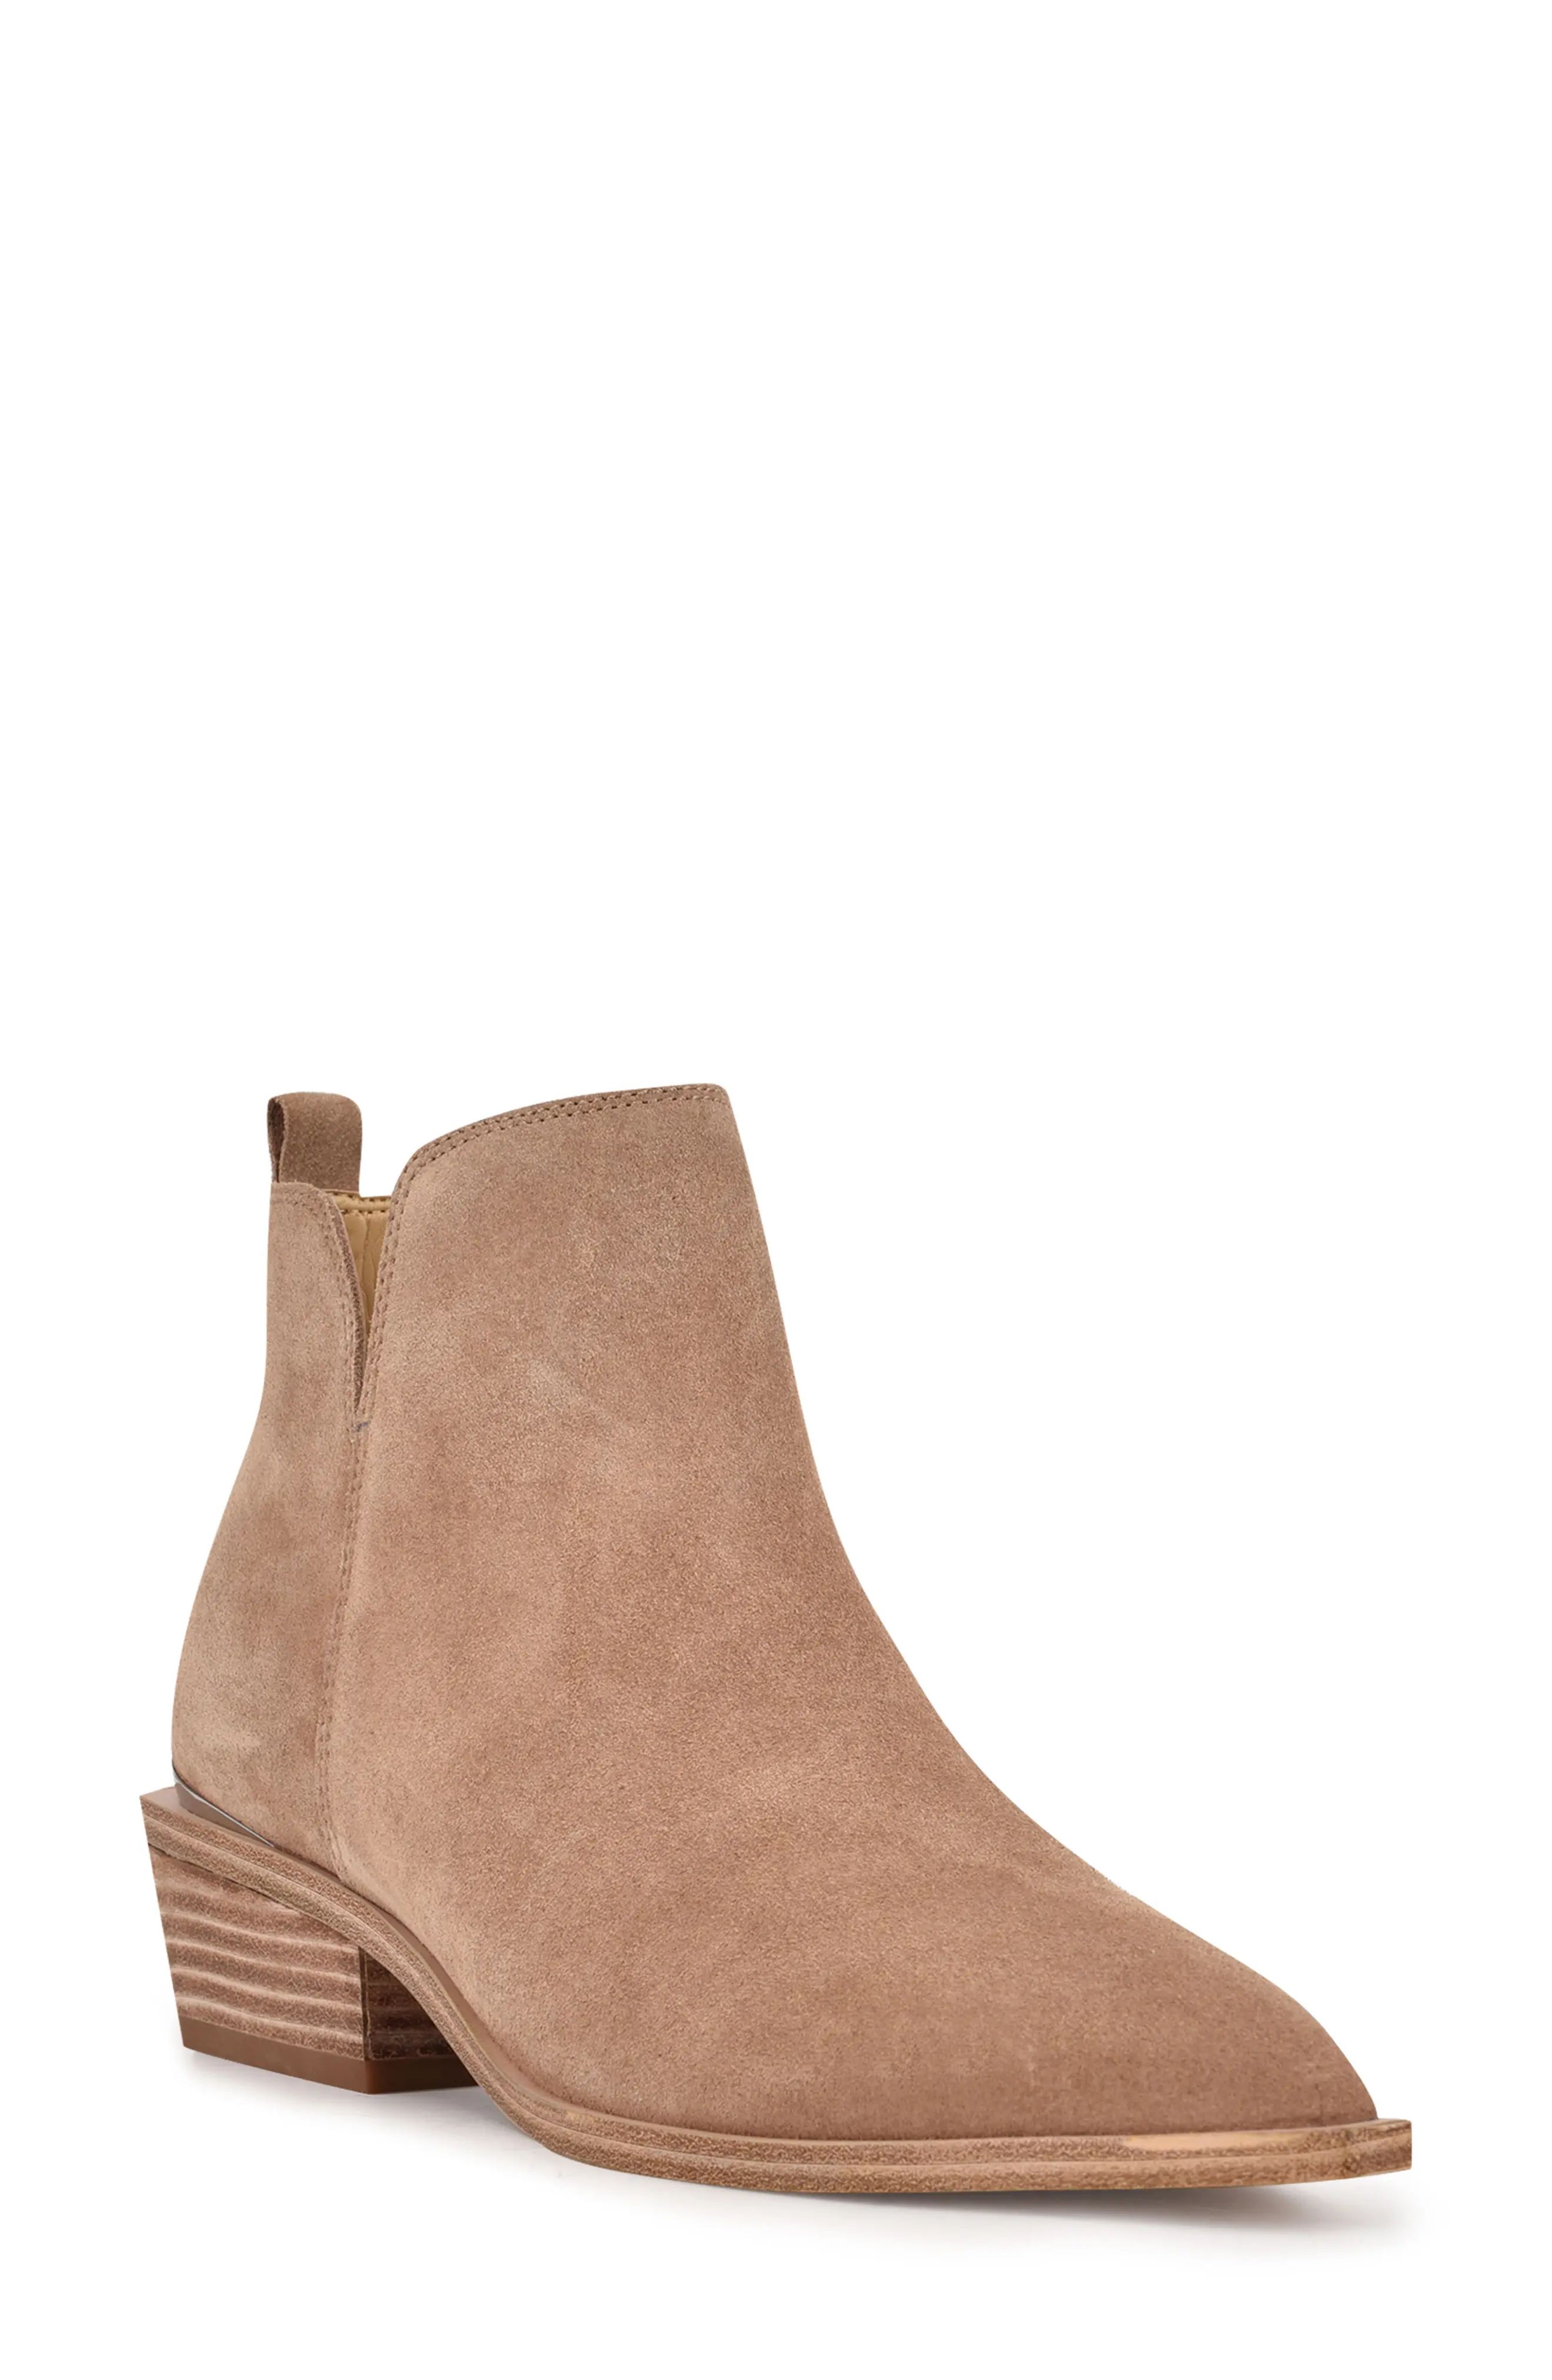 Nine West Yerly Bootie, Size 5 in Light Natural Suede at Nordstrom | Nordstrom